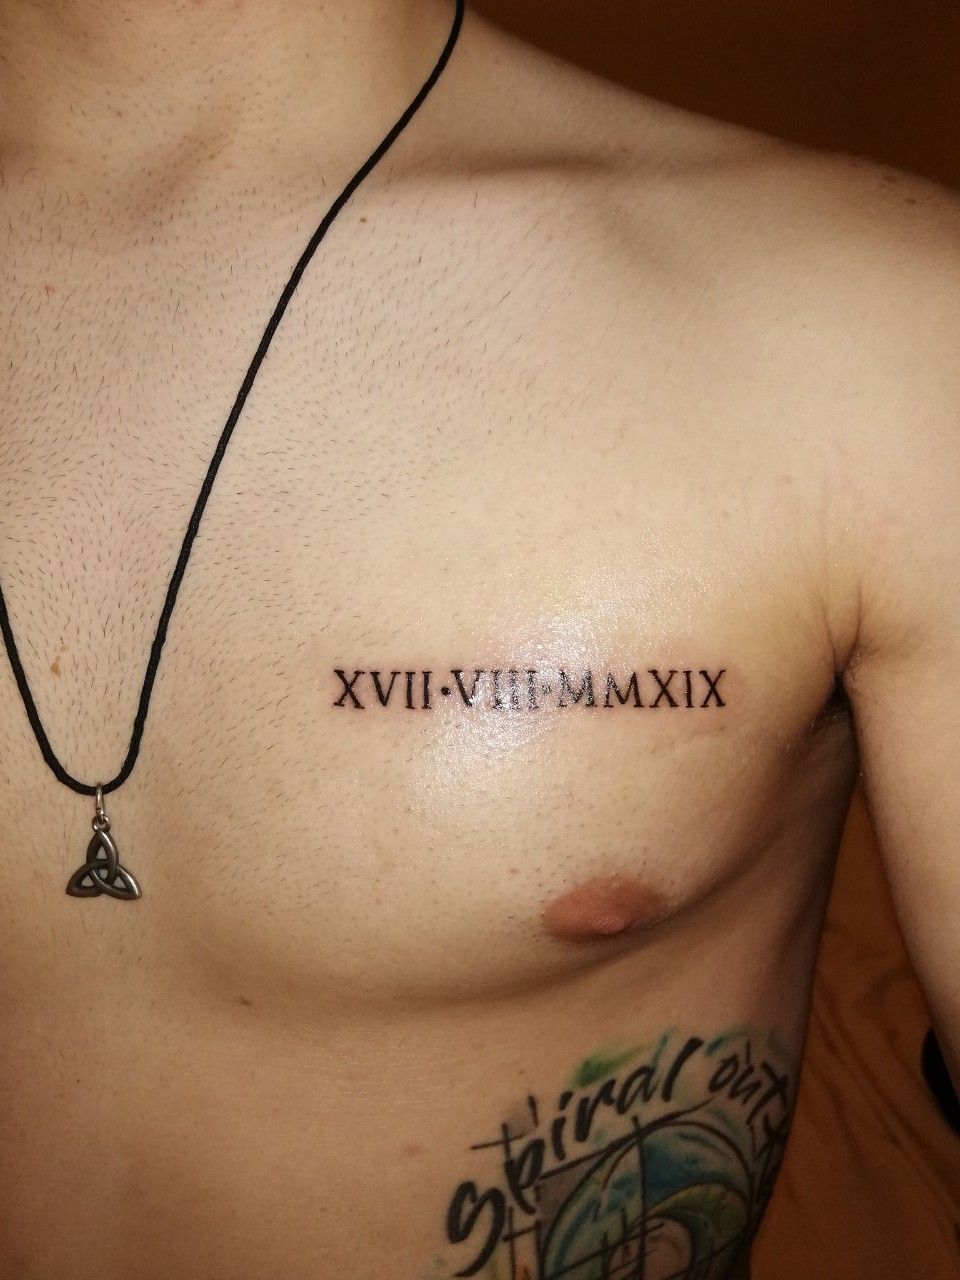 70 Best Roman Numeral Tattoo Designs  Meanings  Be Creative 2019